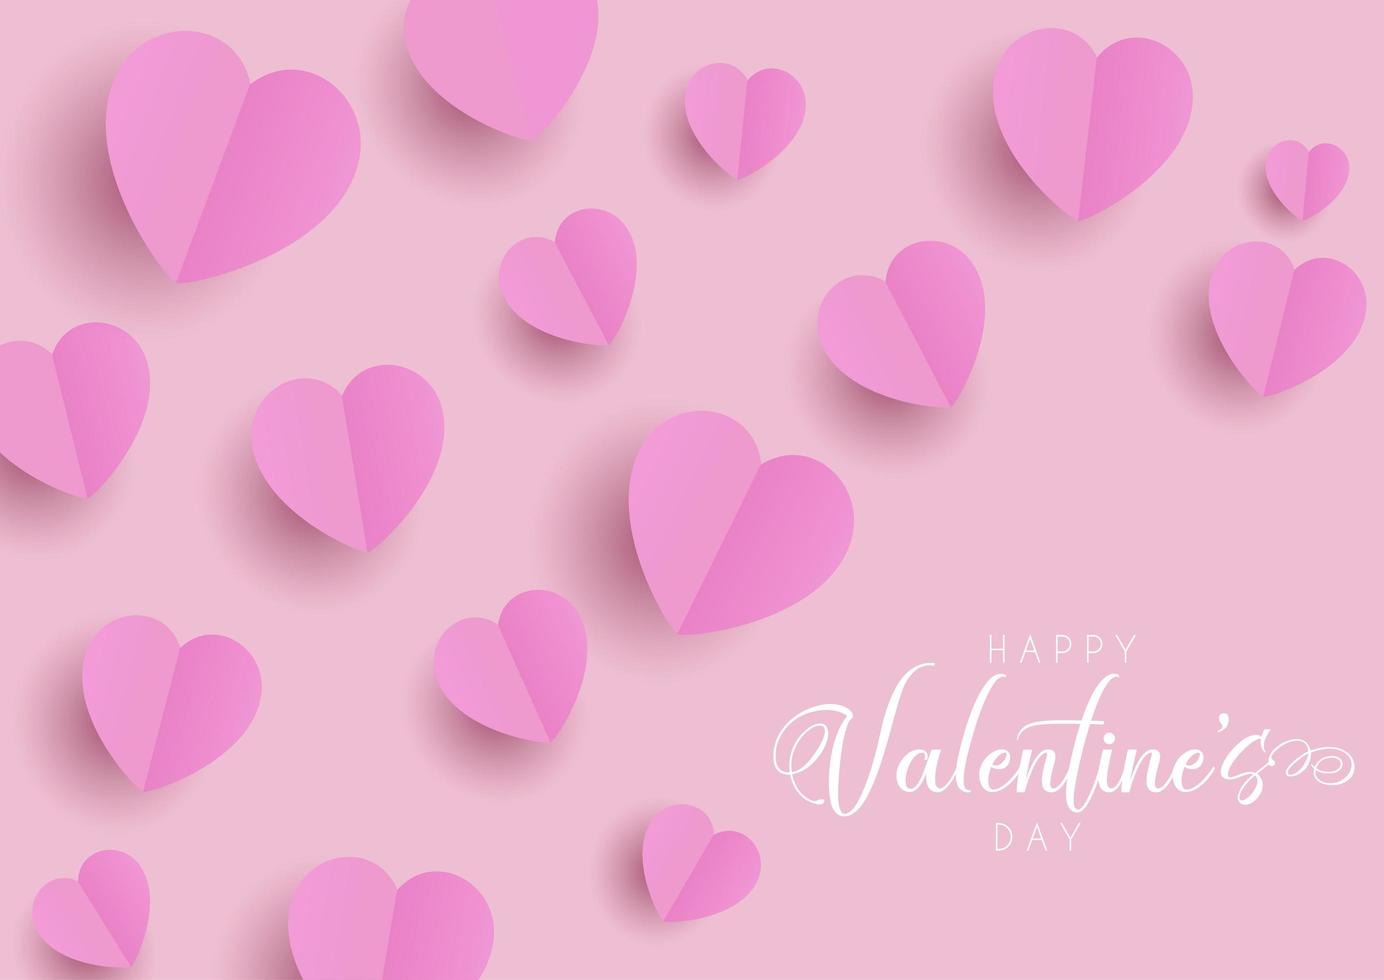 happy-valentines-day-background-with-fol